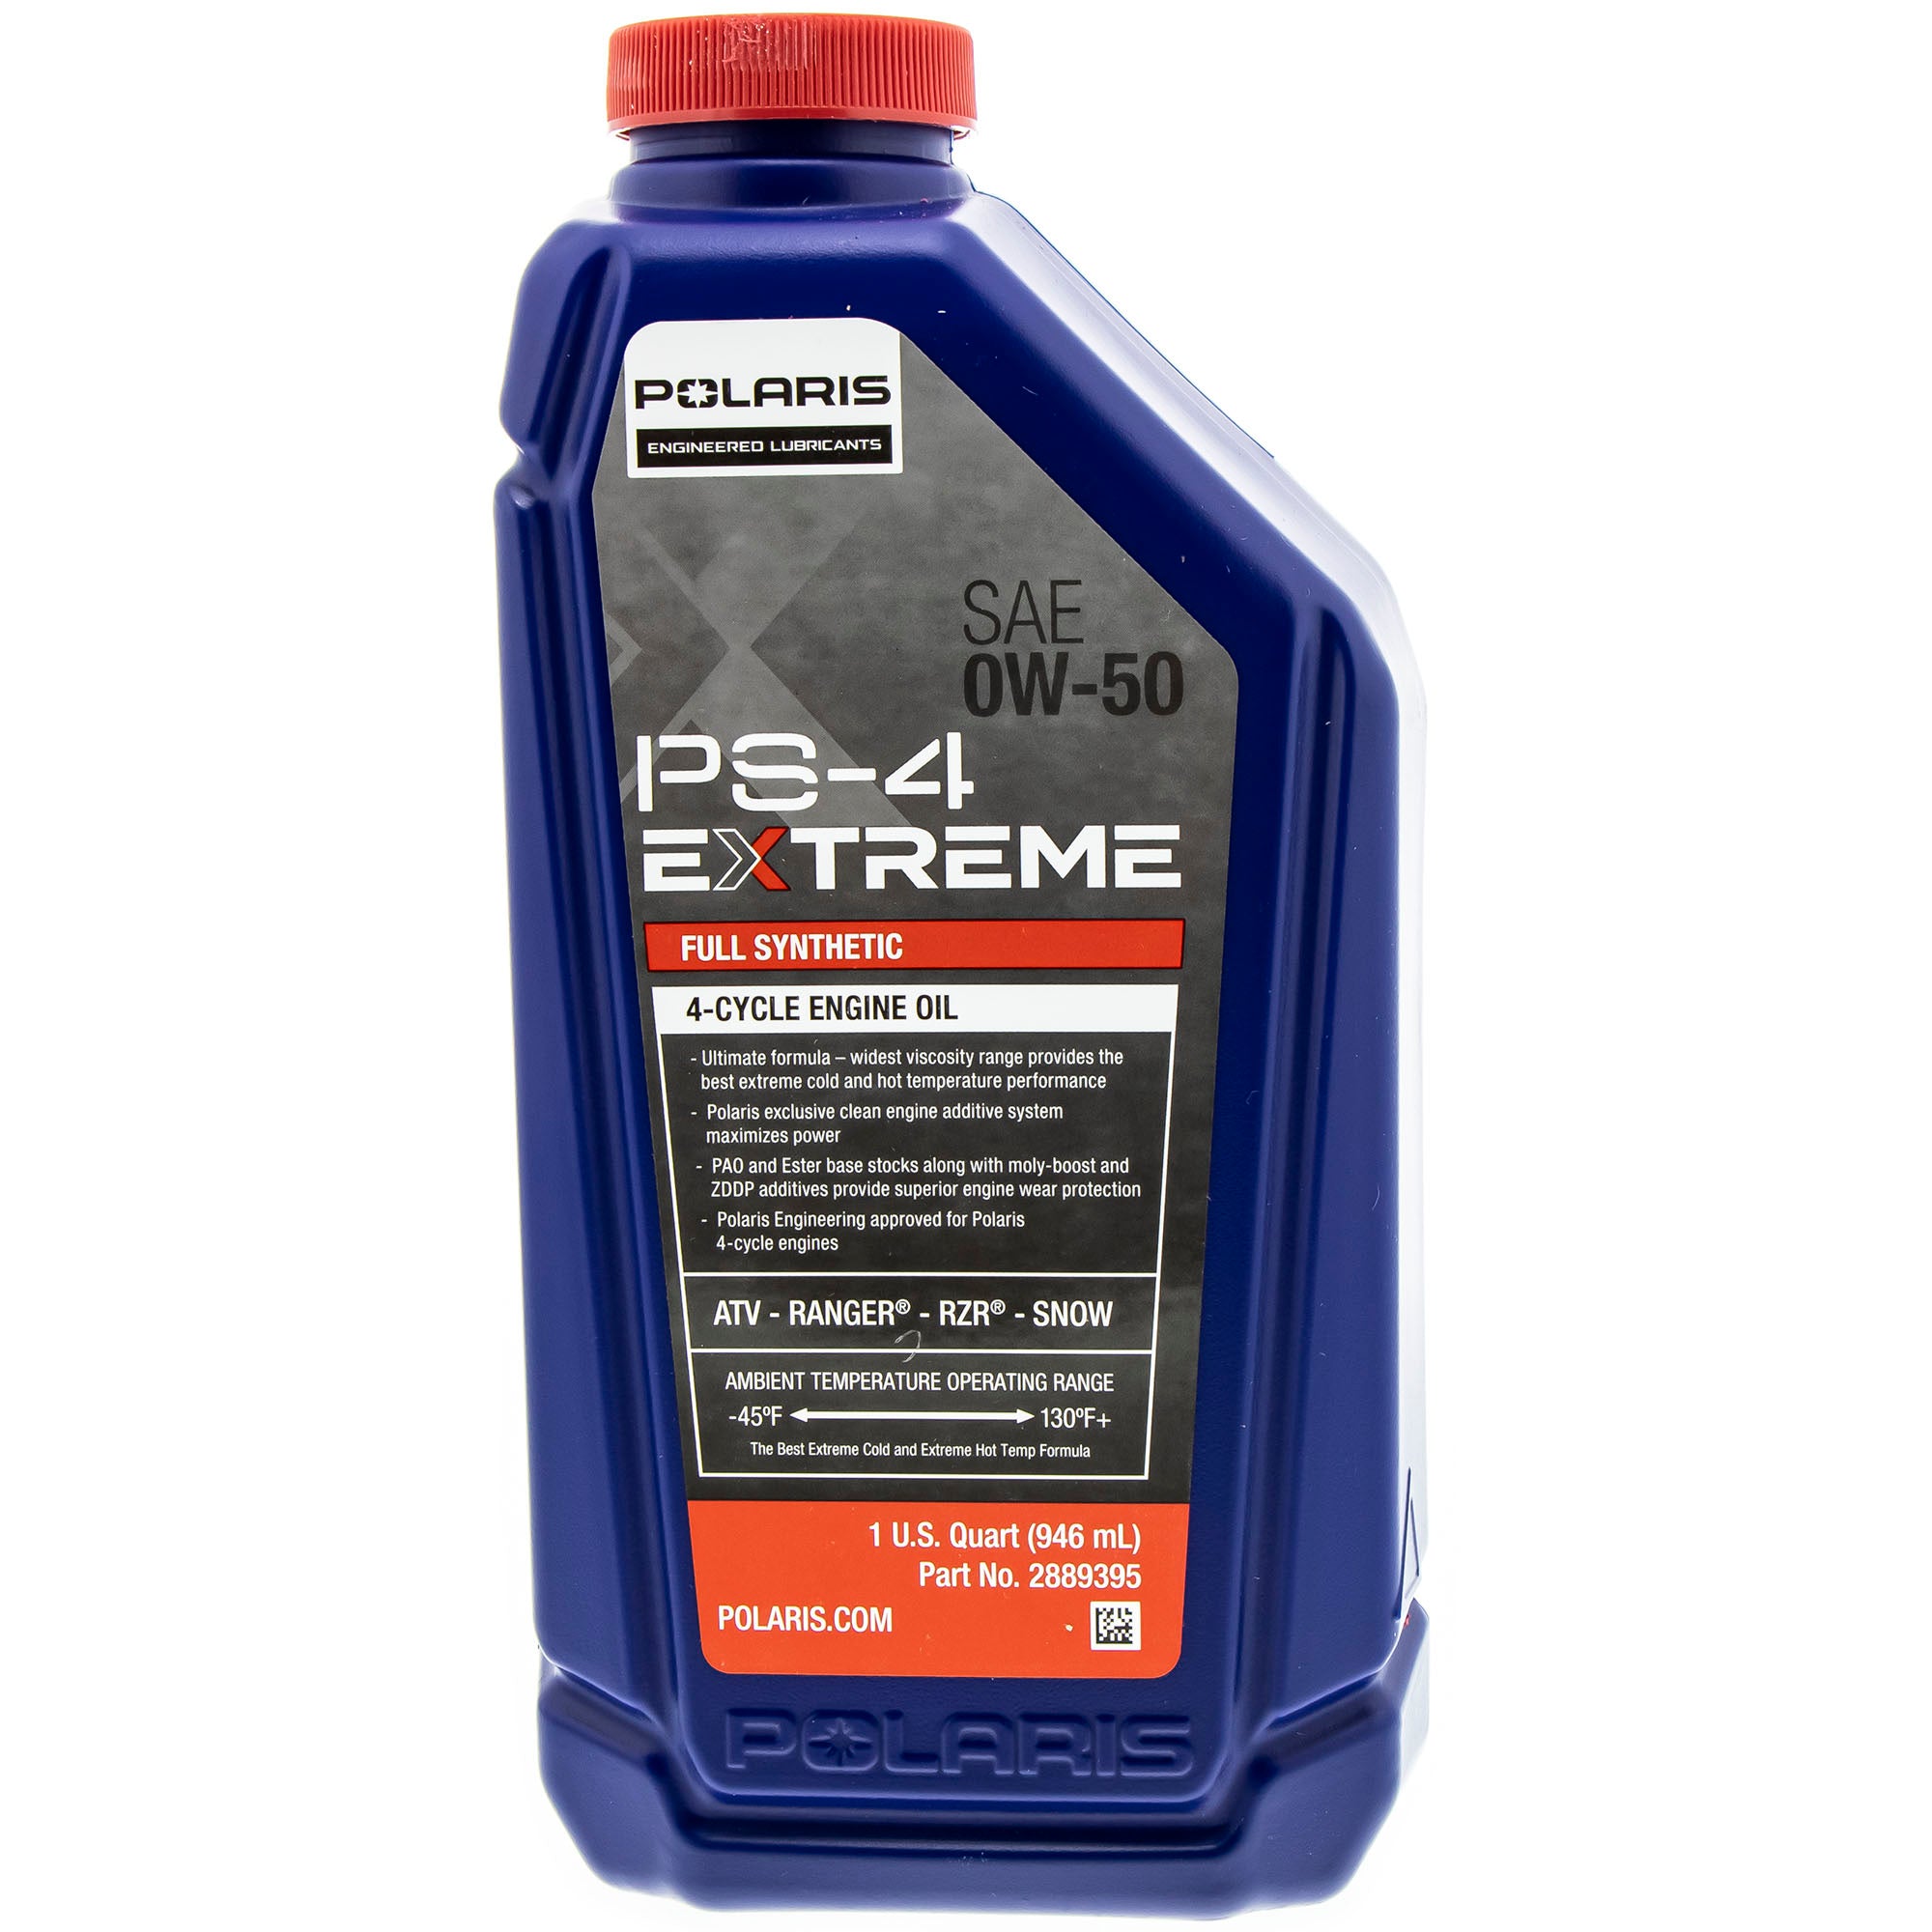 Polaris FKOCK20124 PS-4 Extreme Oil Change Kit 6 Quarts with Filter Xpedition 425 2520799